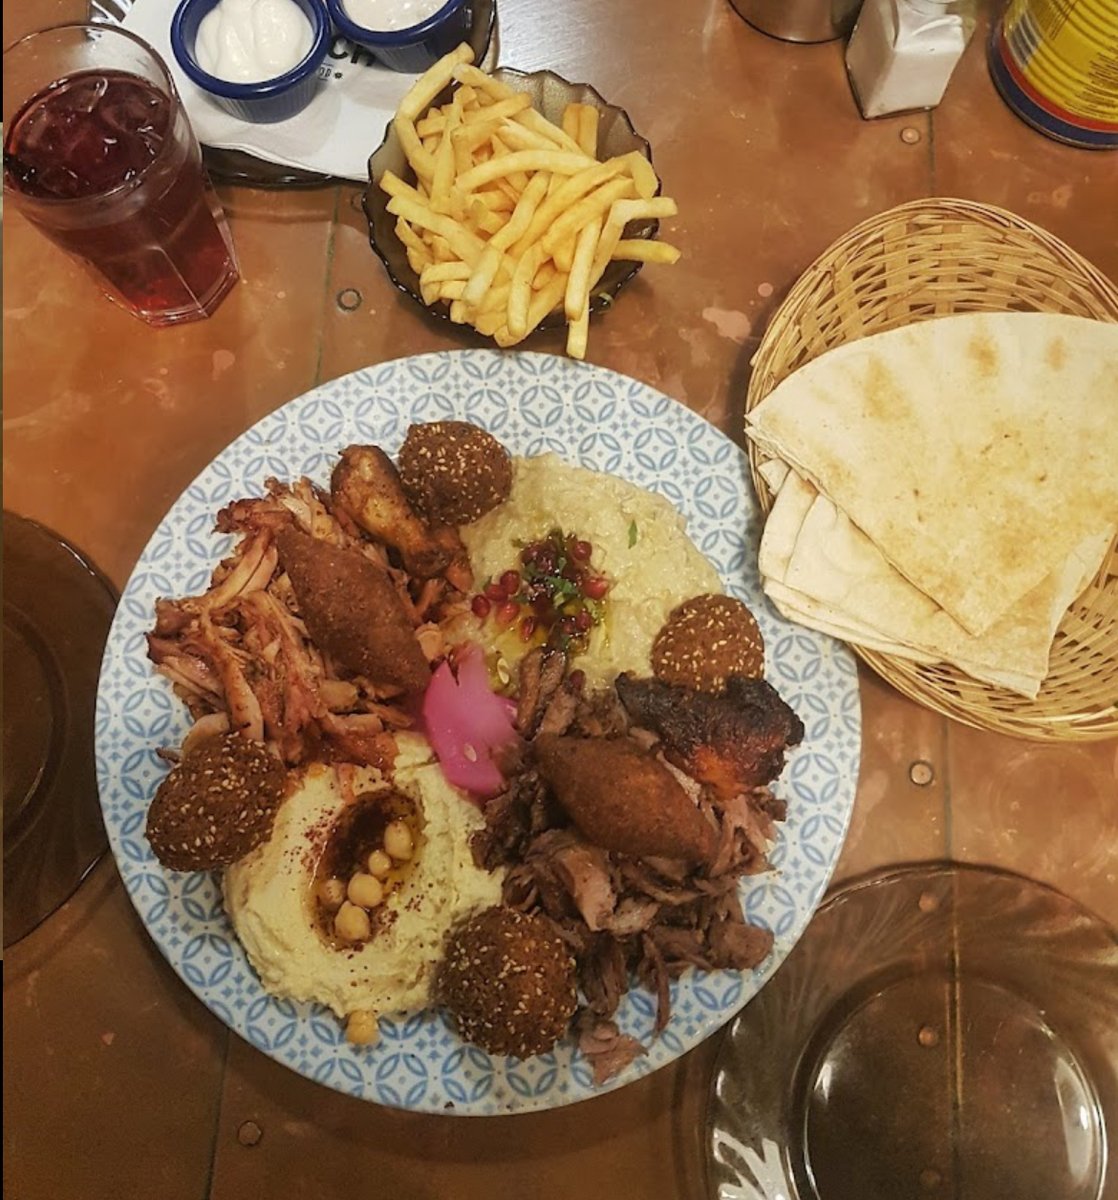 Say hello to the weekend with your fave Lebanese and Moroccan dishes 😍
.
.
.
#lebeanse #fridayfeeling #bakchich #loveliverpool #whoshungry #lebanesecuisine #liverpoolfoodie #liverpoolfoodblog #boldstreet #shawarma